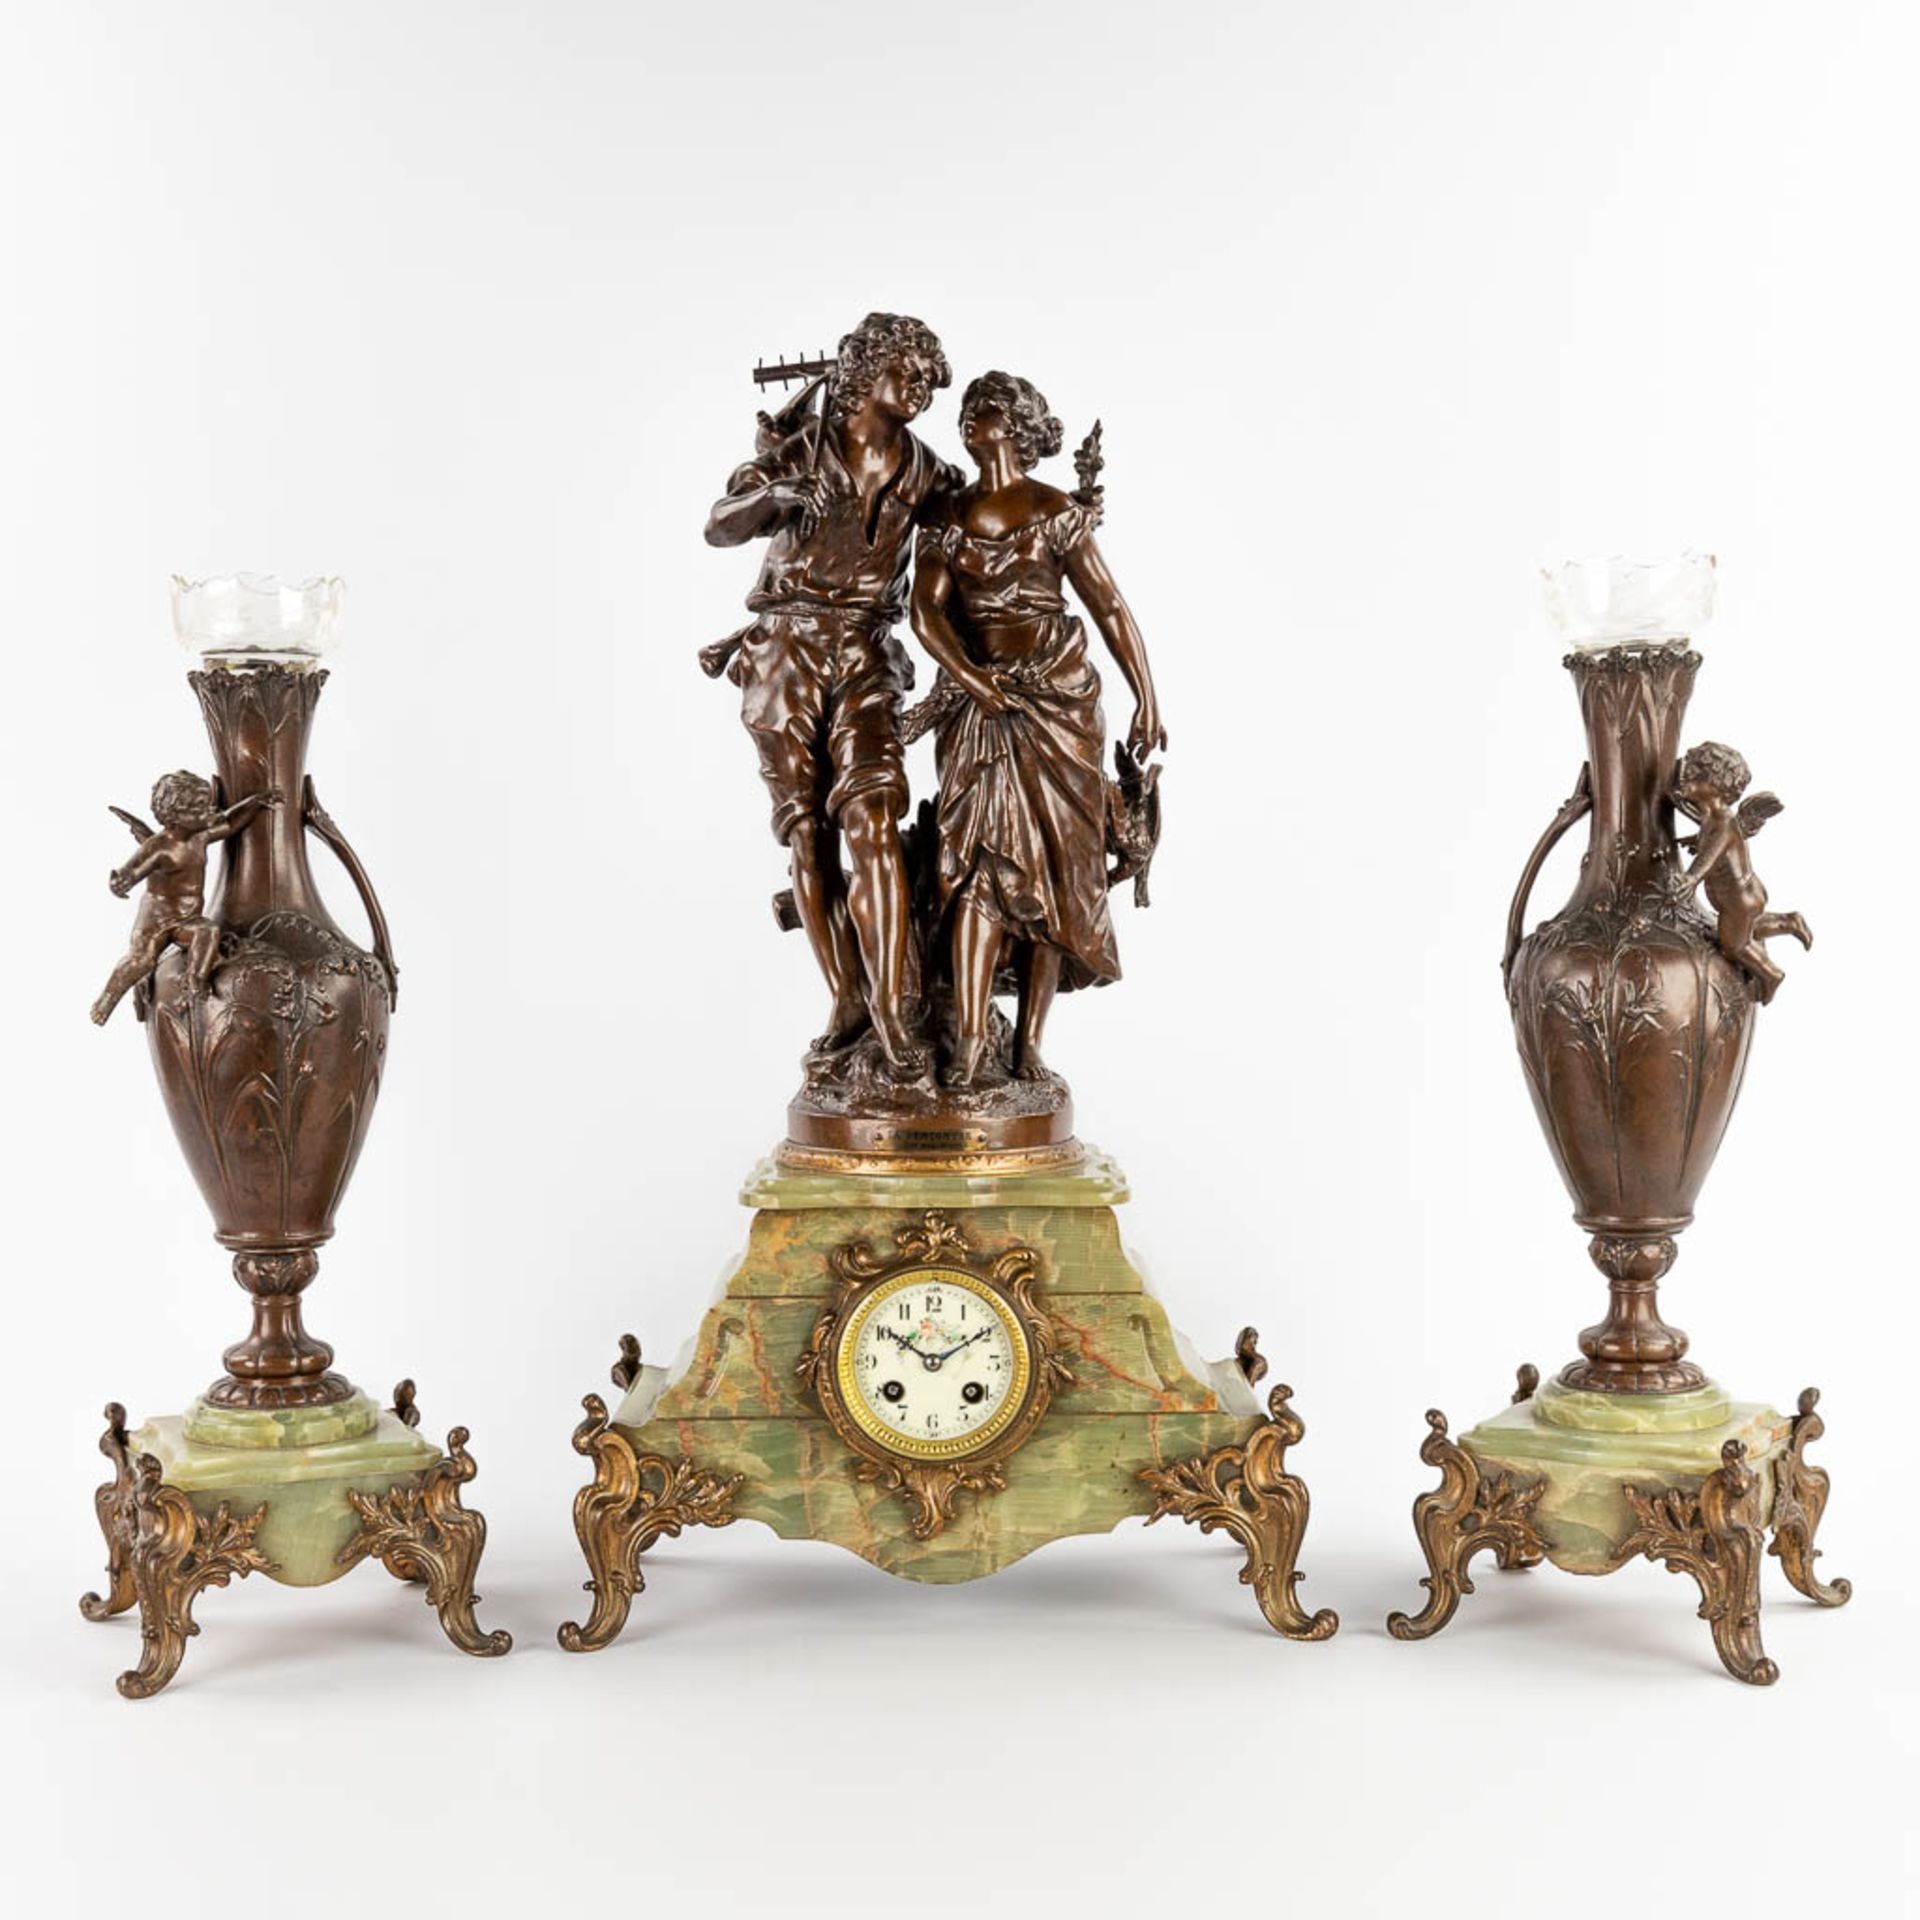 A three-piece mantle garniture clock with side pieces, spelter on an onyx base. 19th C. (D:20 x W:37